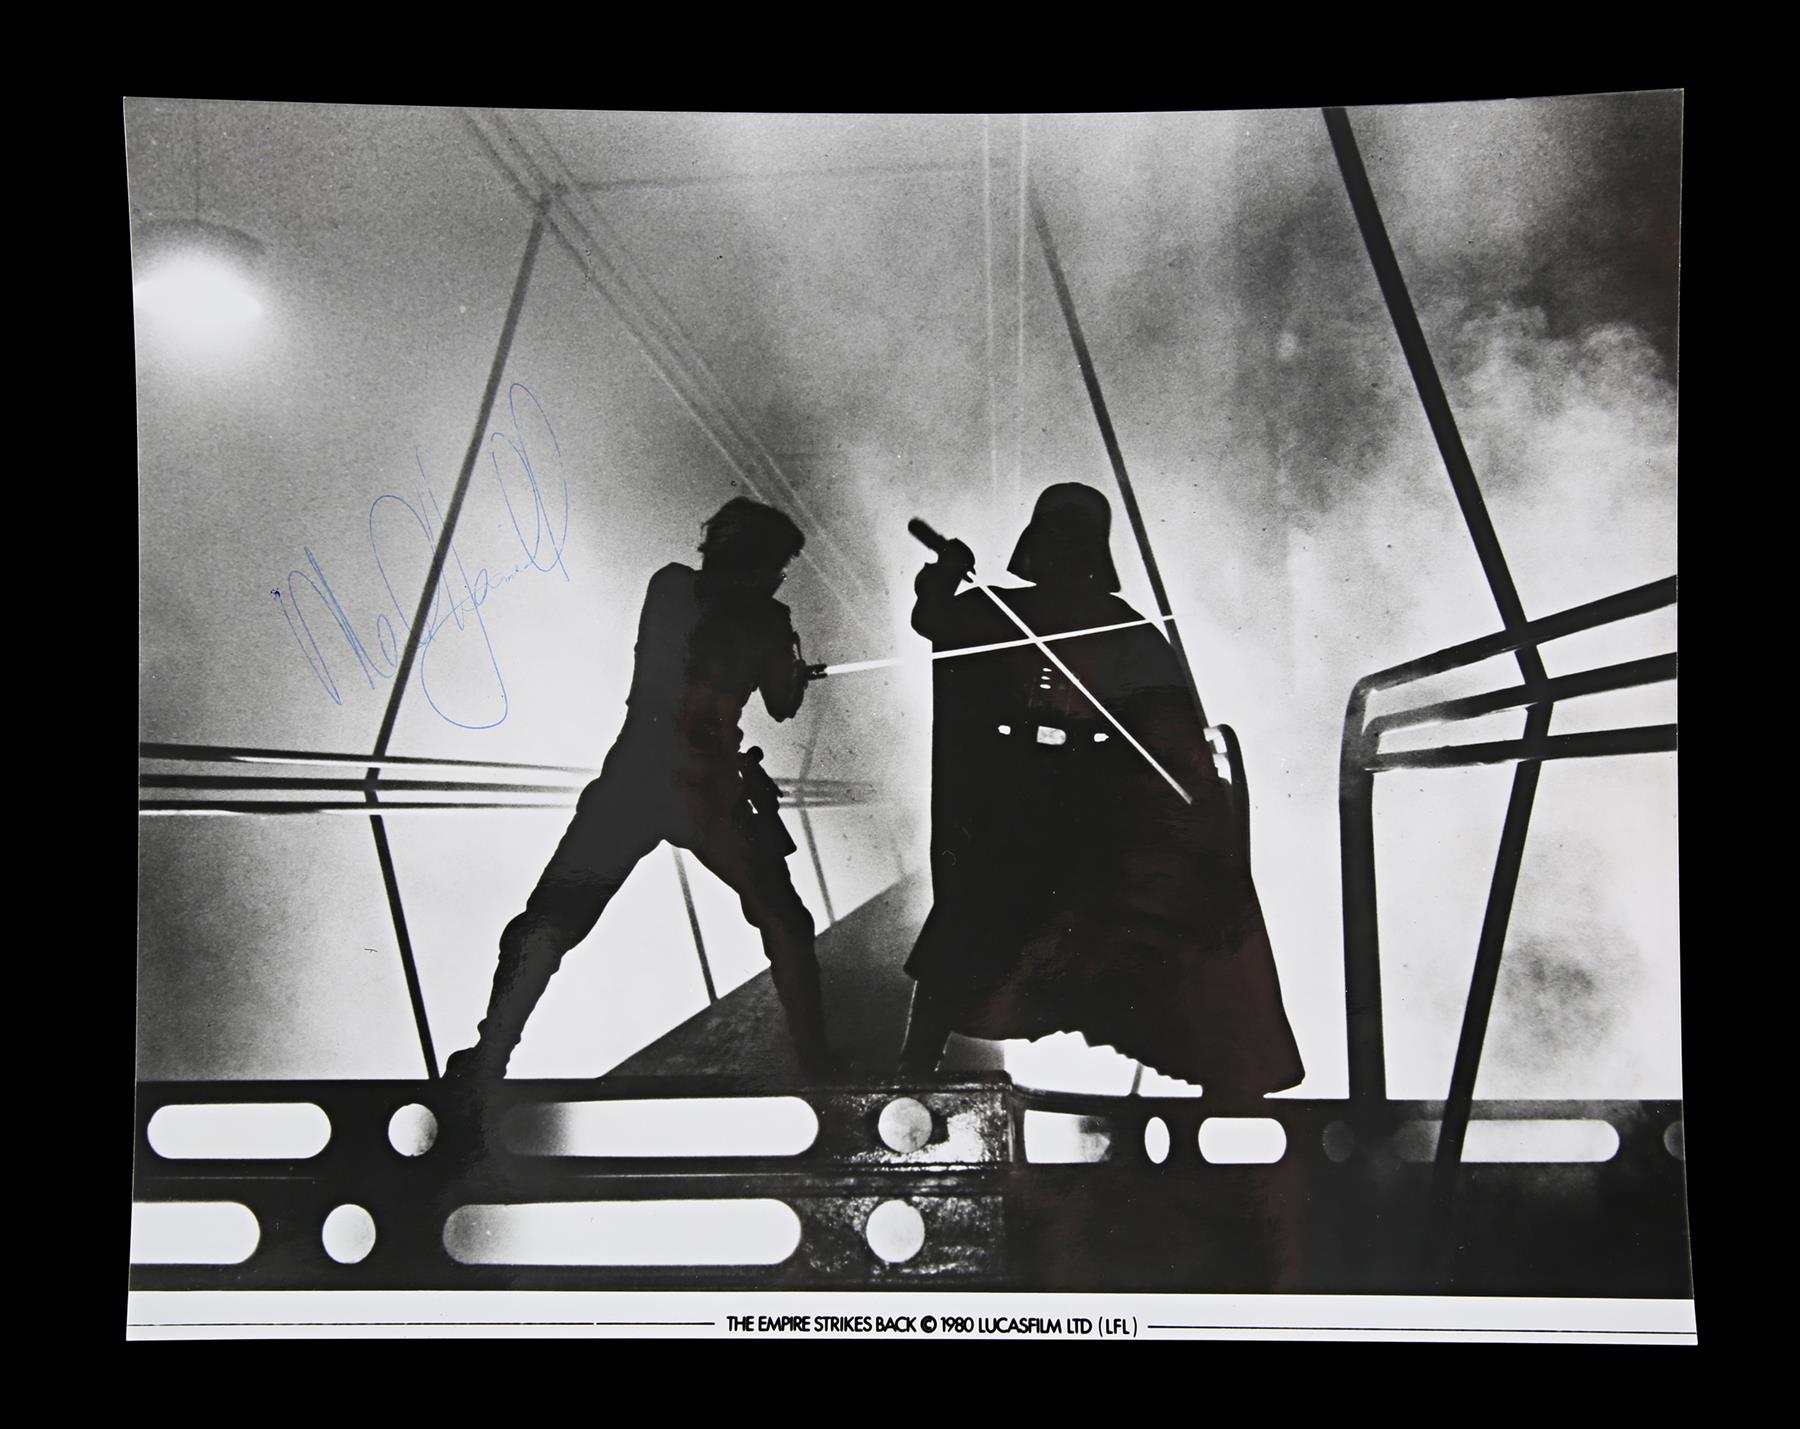 STAR WARS: THE EMPIRE STRIKES BACK (1980) - Set of Eight US Front of House Lobby Cards, 1980 - Image 6 of 6